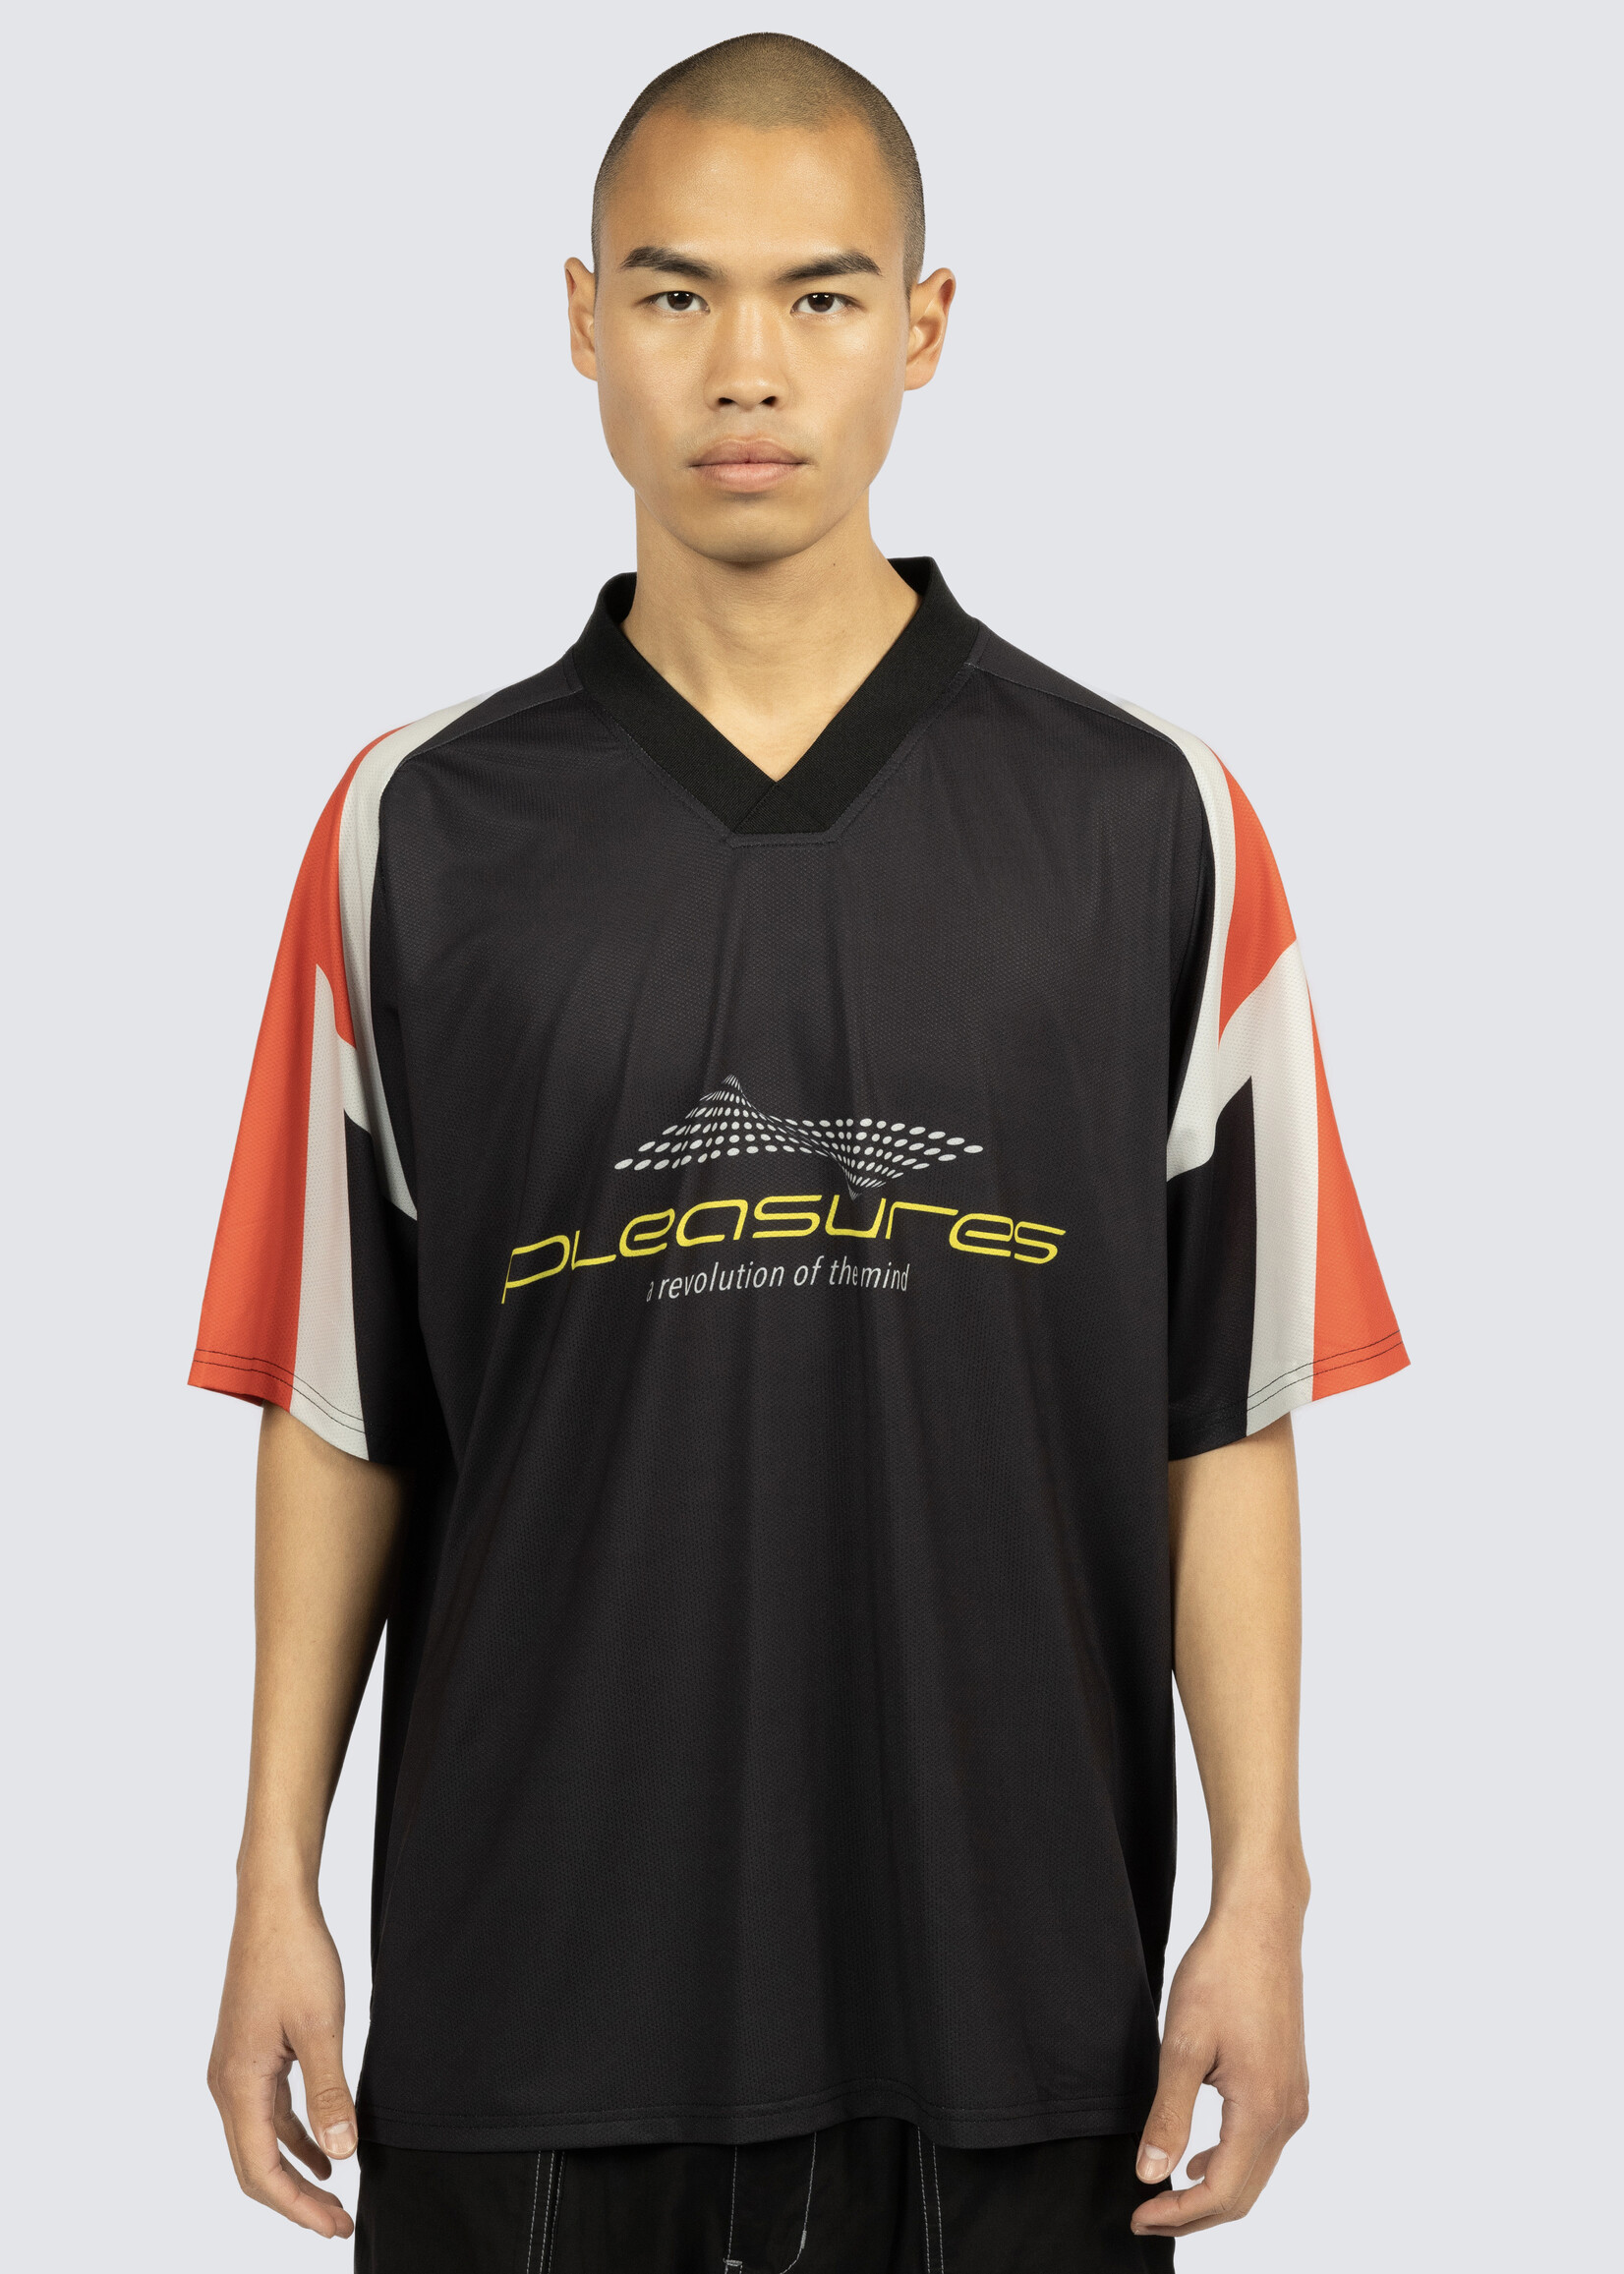 PLEASURES Mind Soccer Jersey in Black and Red